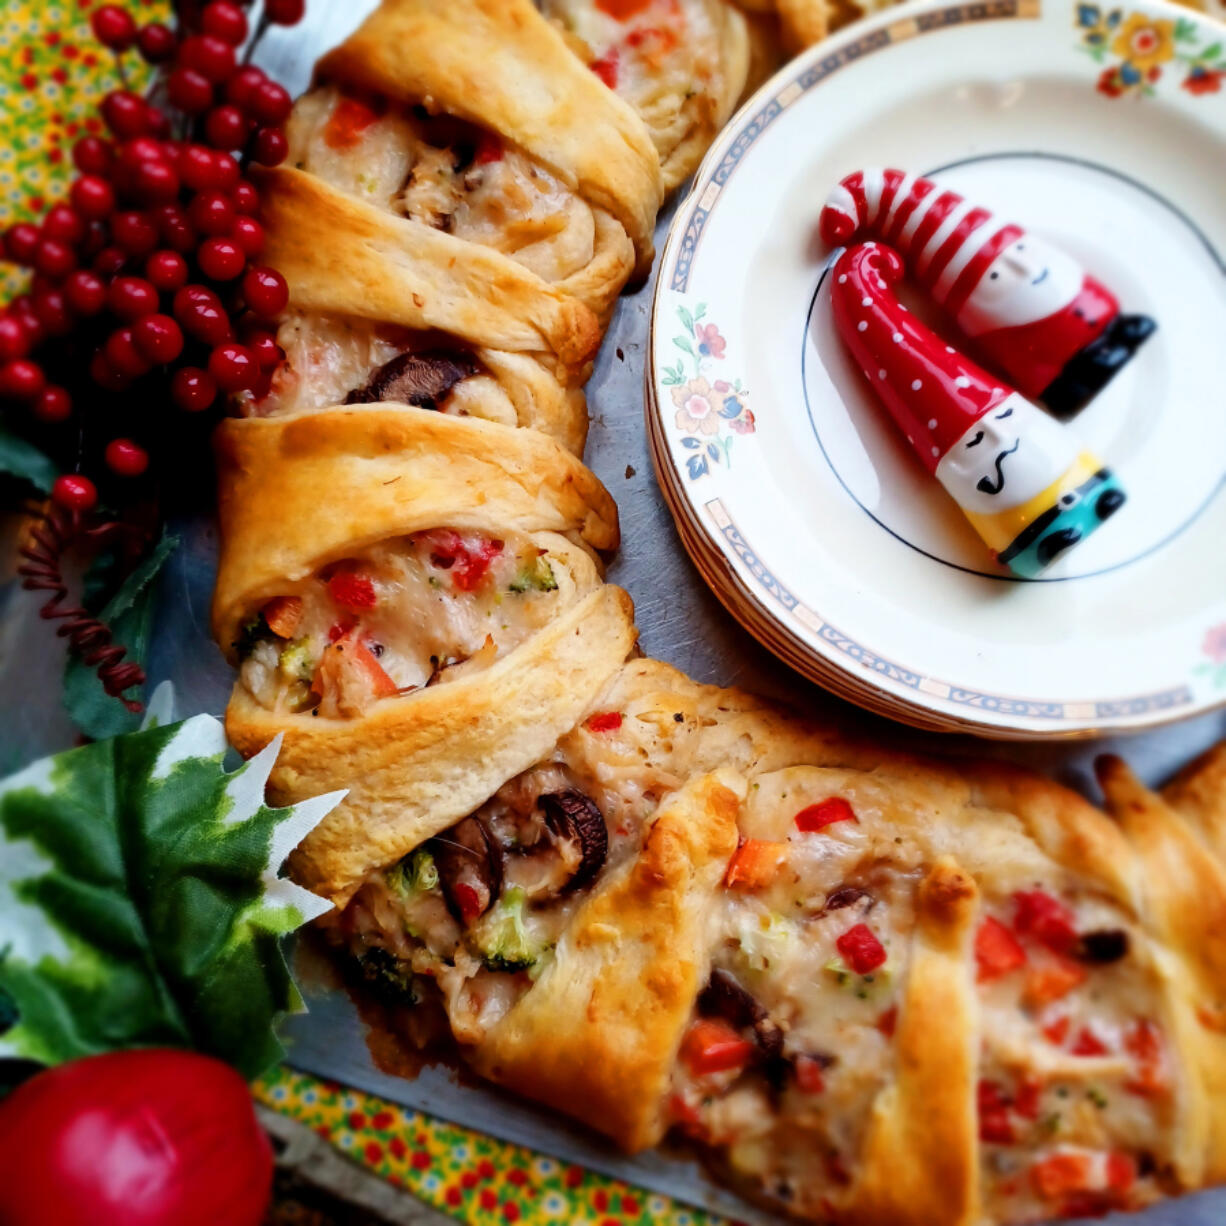 With refrigerated crescent rolls, cream of mushroom soup and canned chicken, this savory wreath works as an appetizer or a quick dinner.